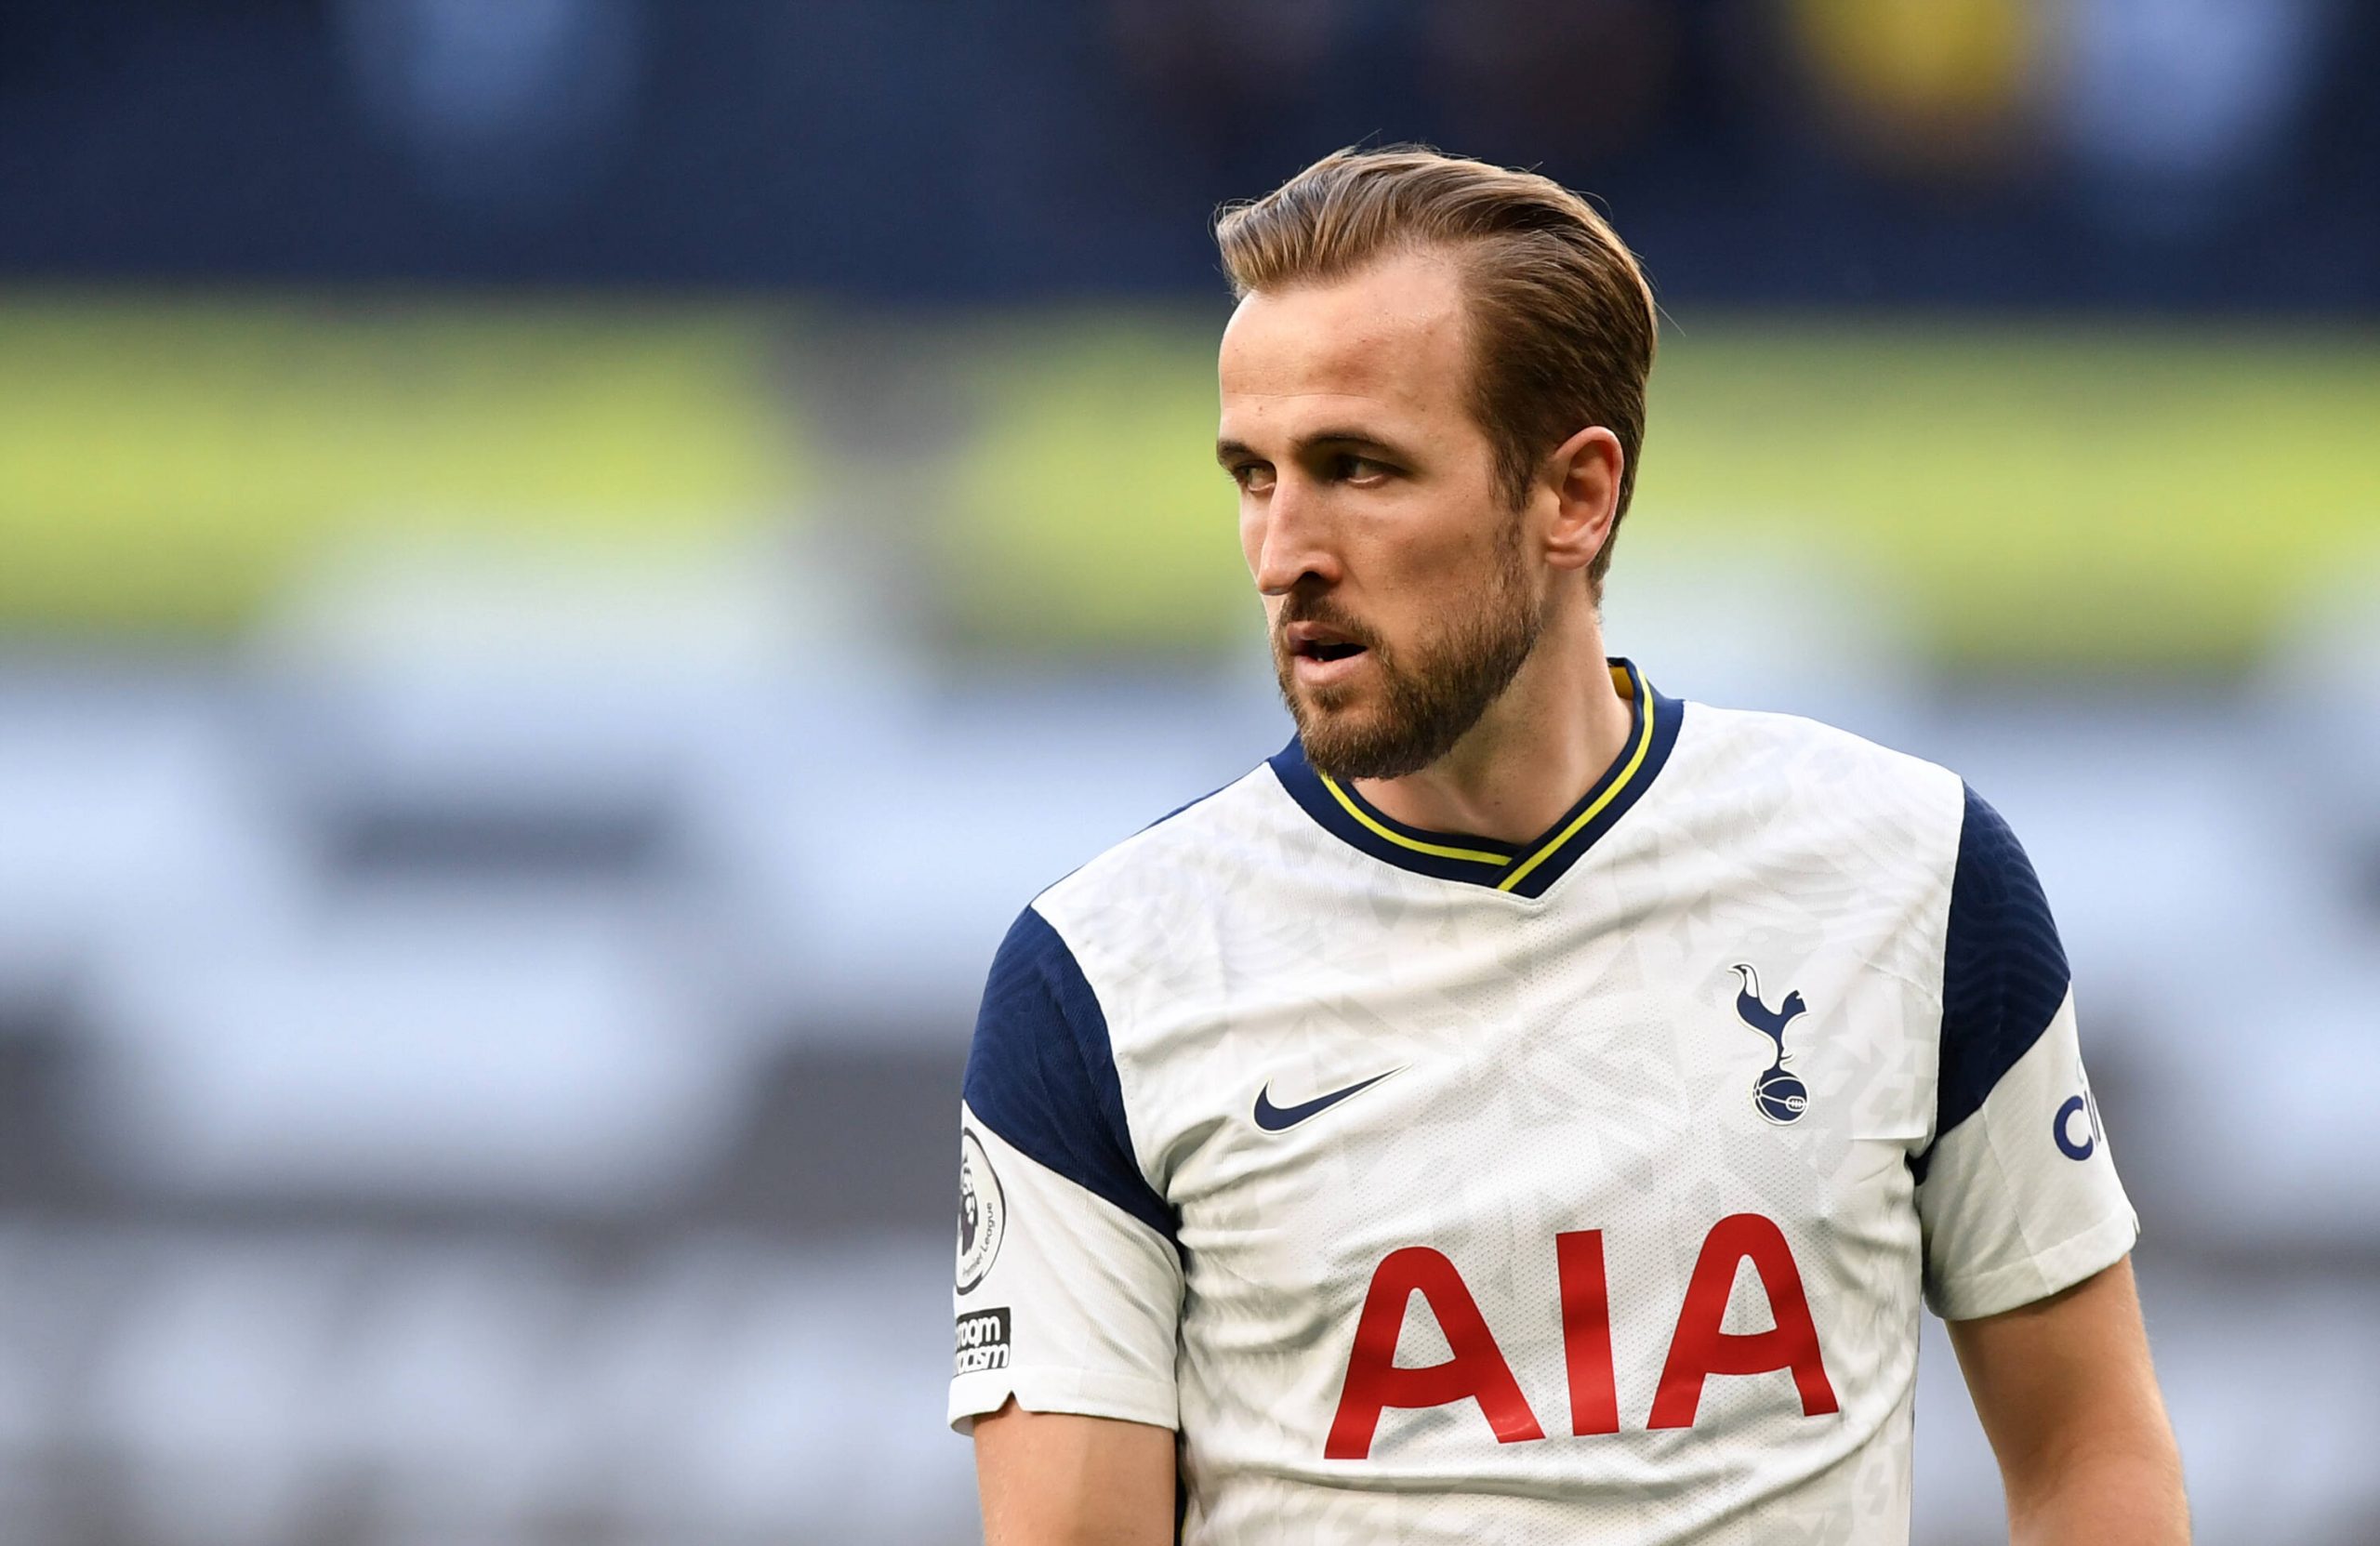 Antonio Conte has suggested that the current form showcased by Tottenham Hotspur superstar Harry Kane is unusual.